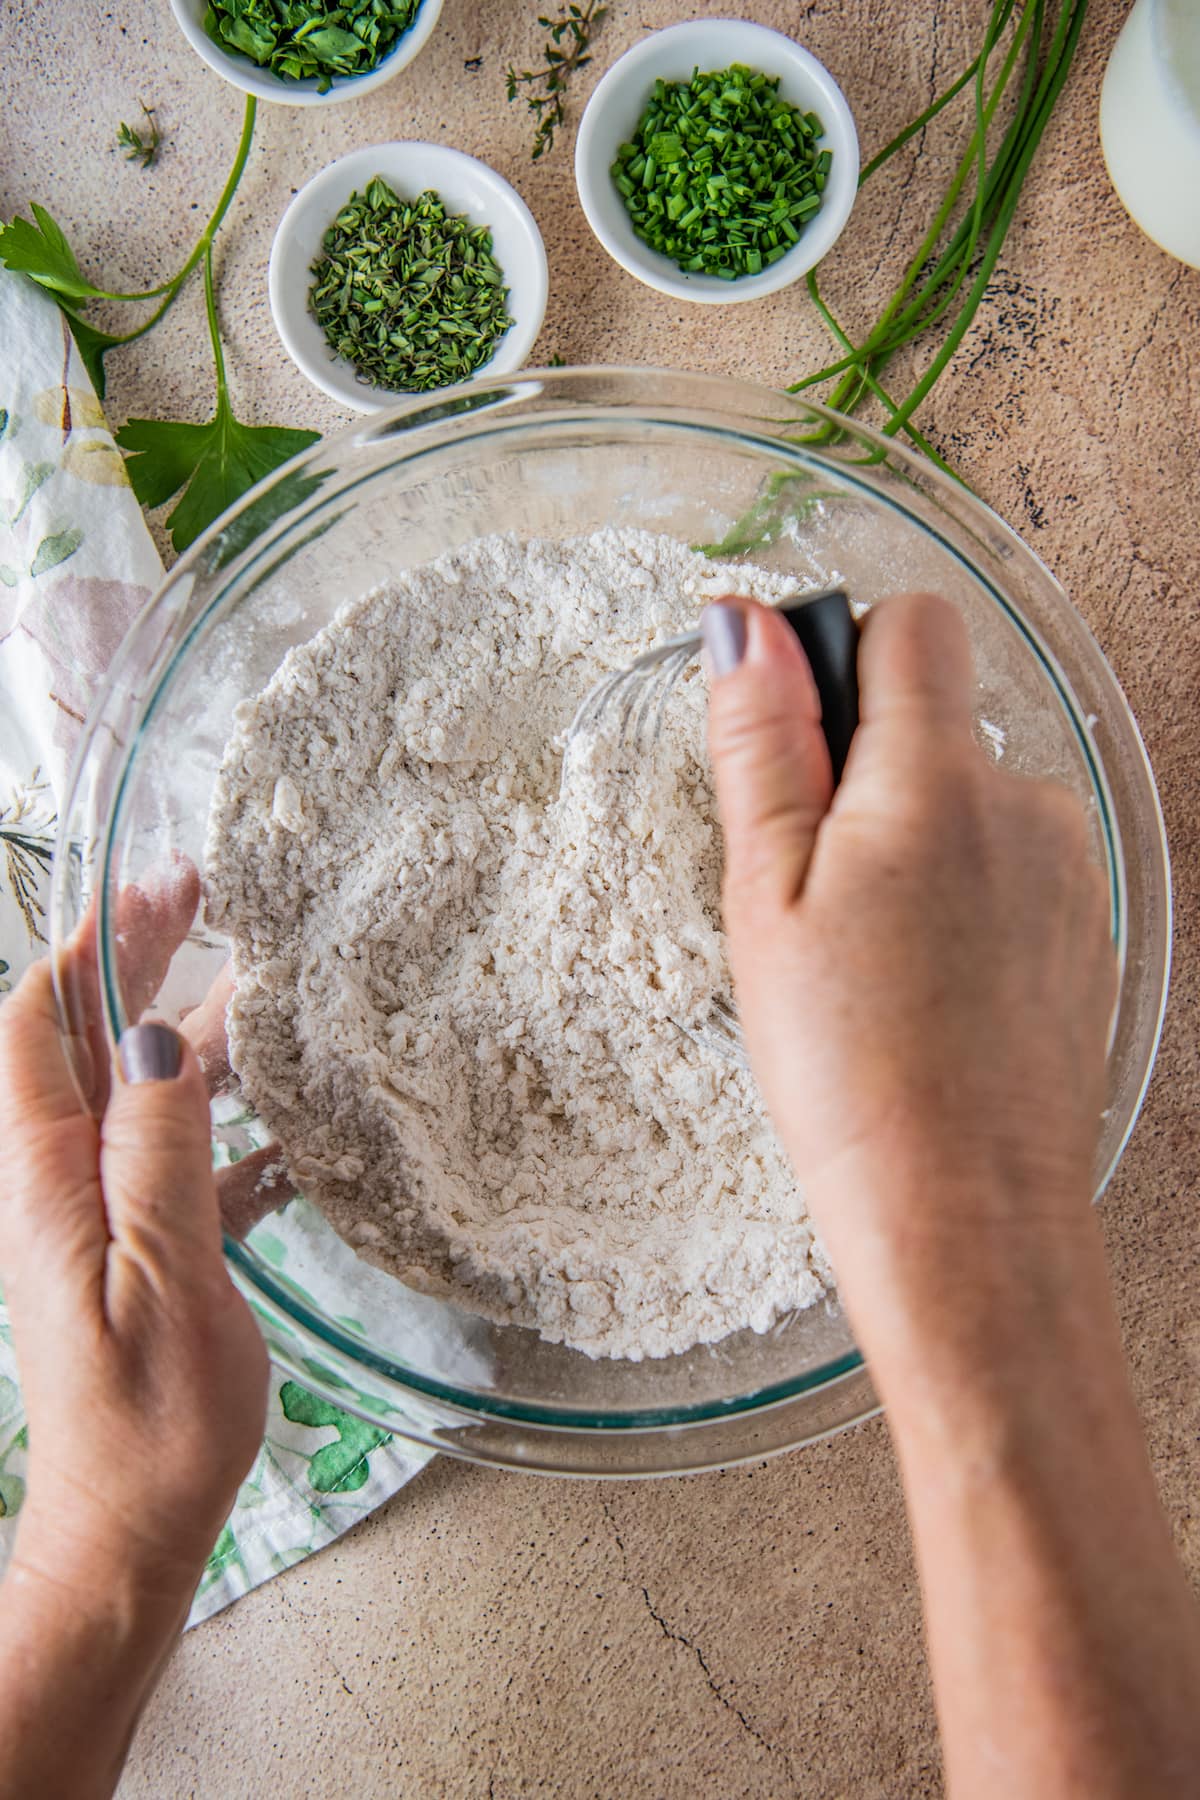 whisking together a flour mixture in a glass bowl